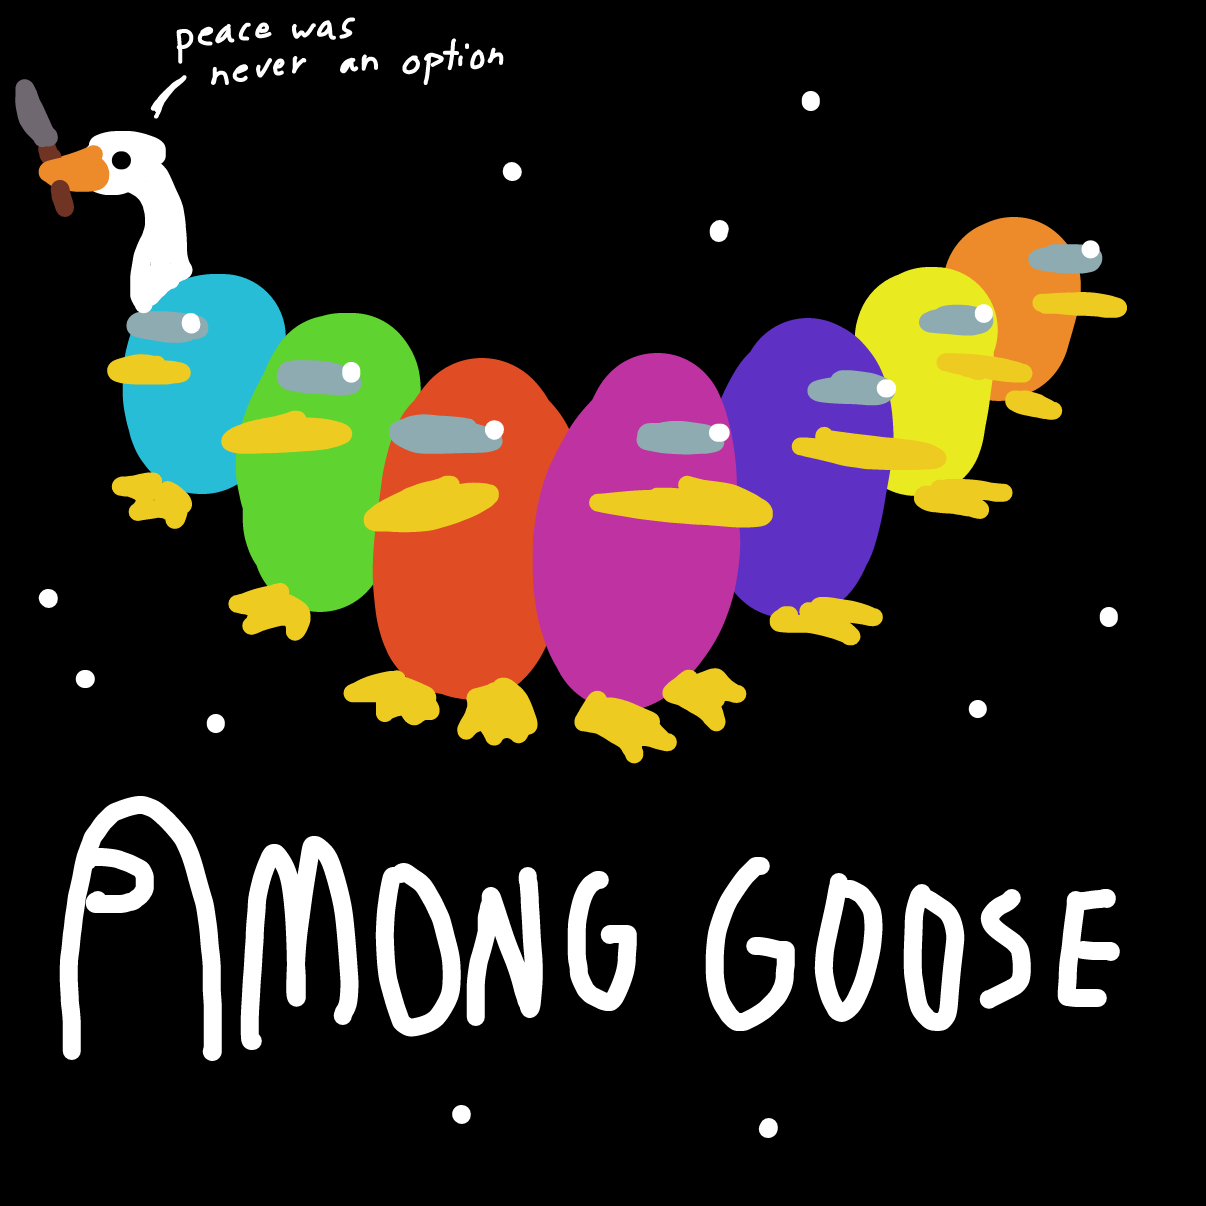 Drawing in Among Goose by bajira